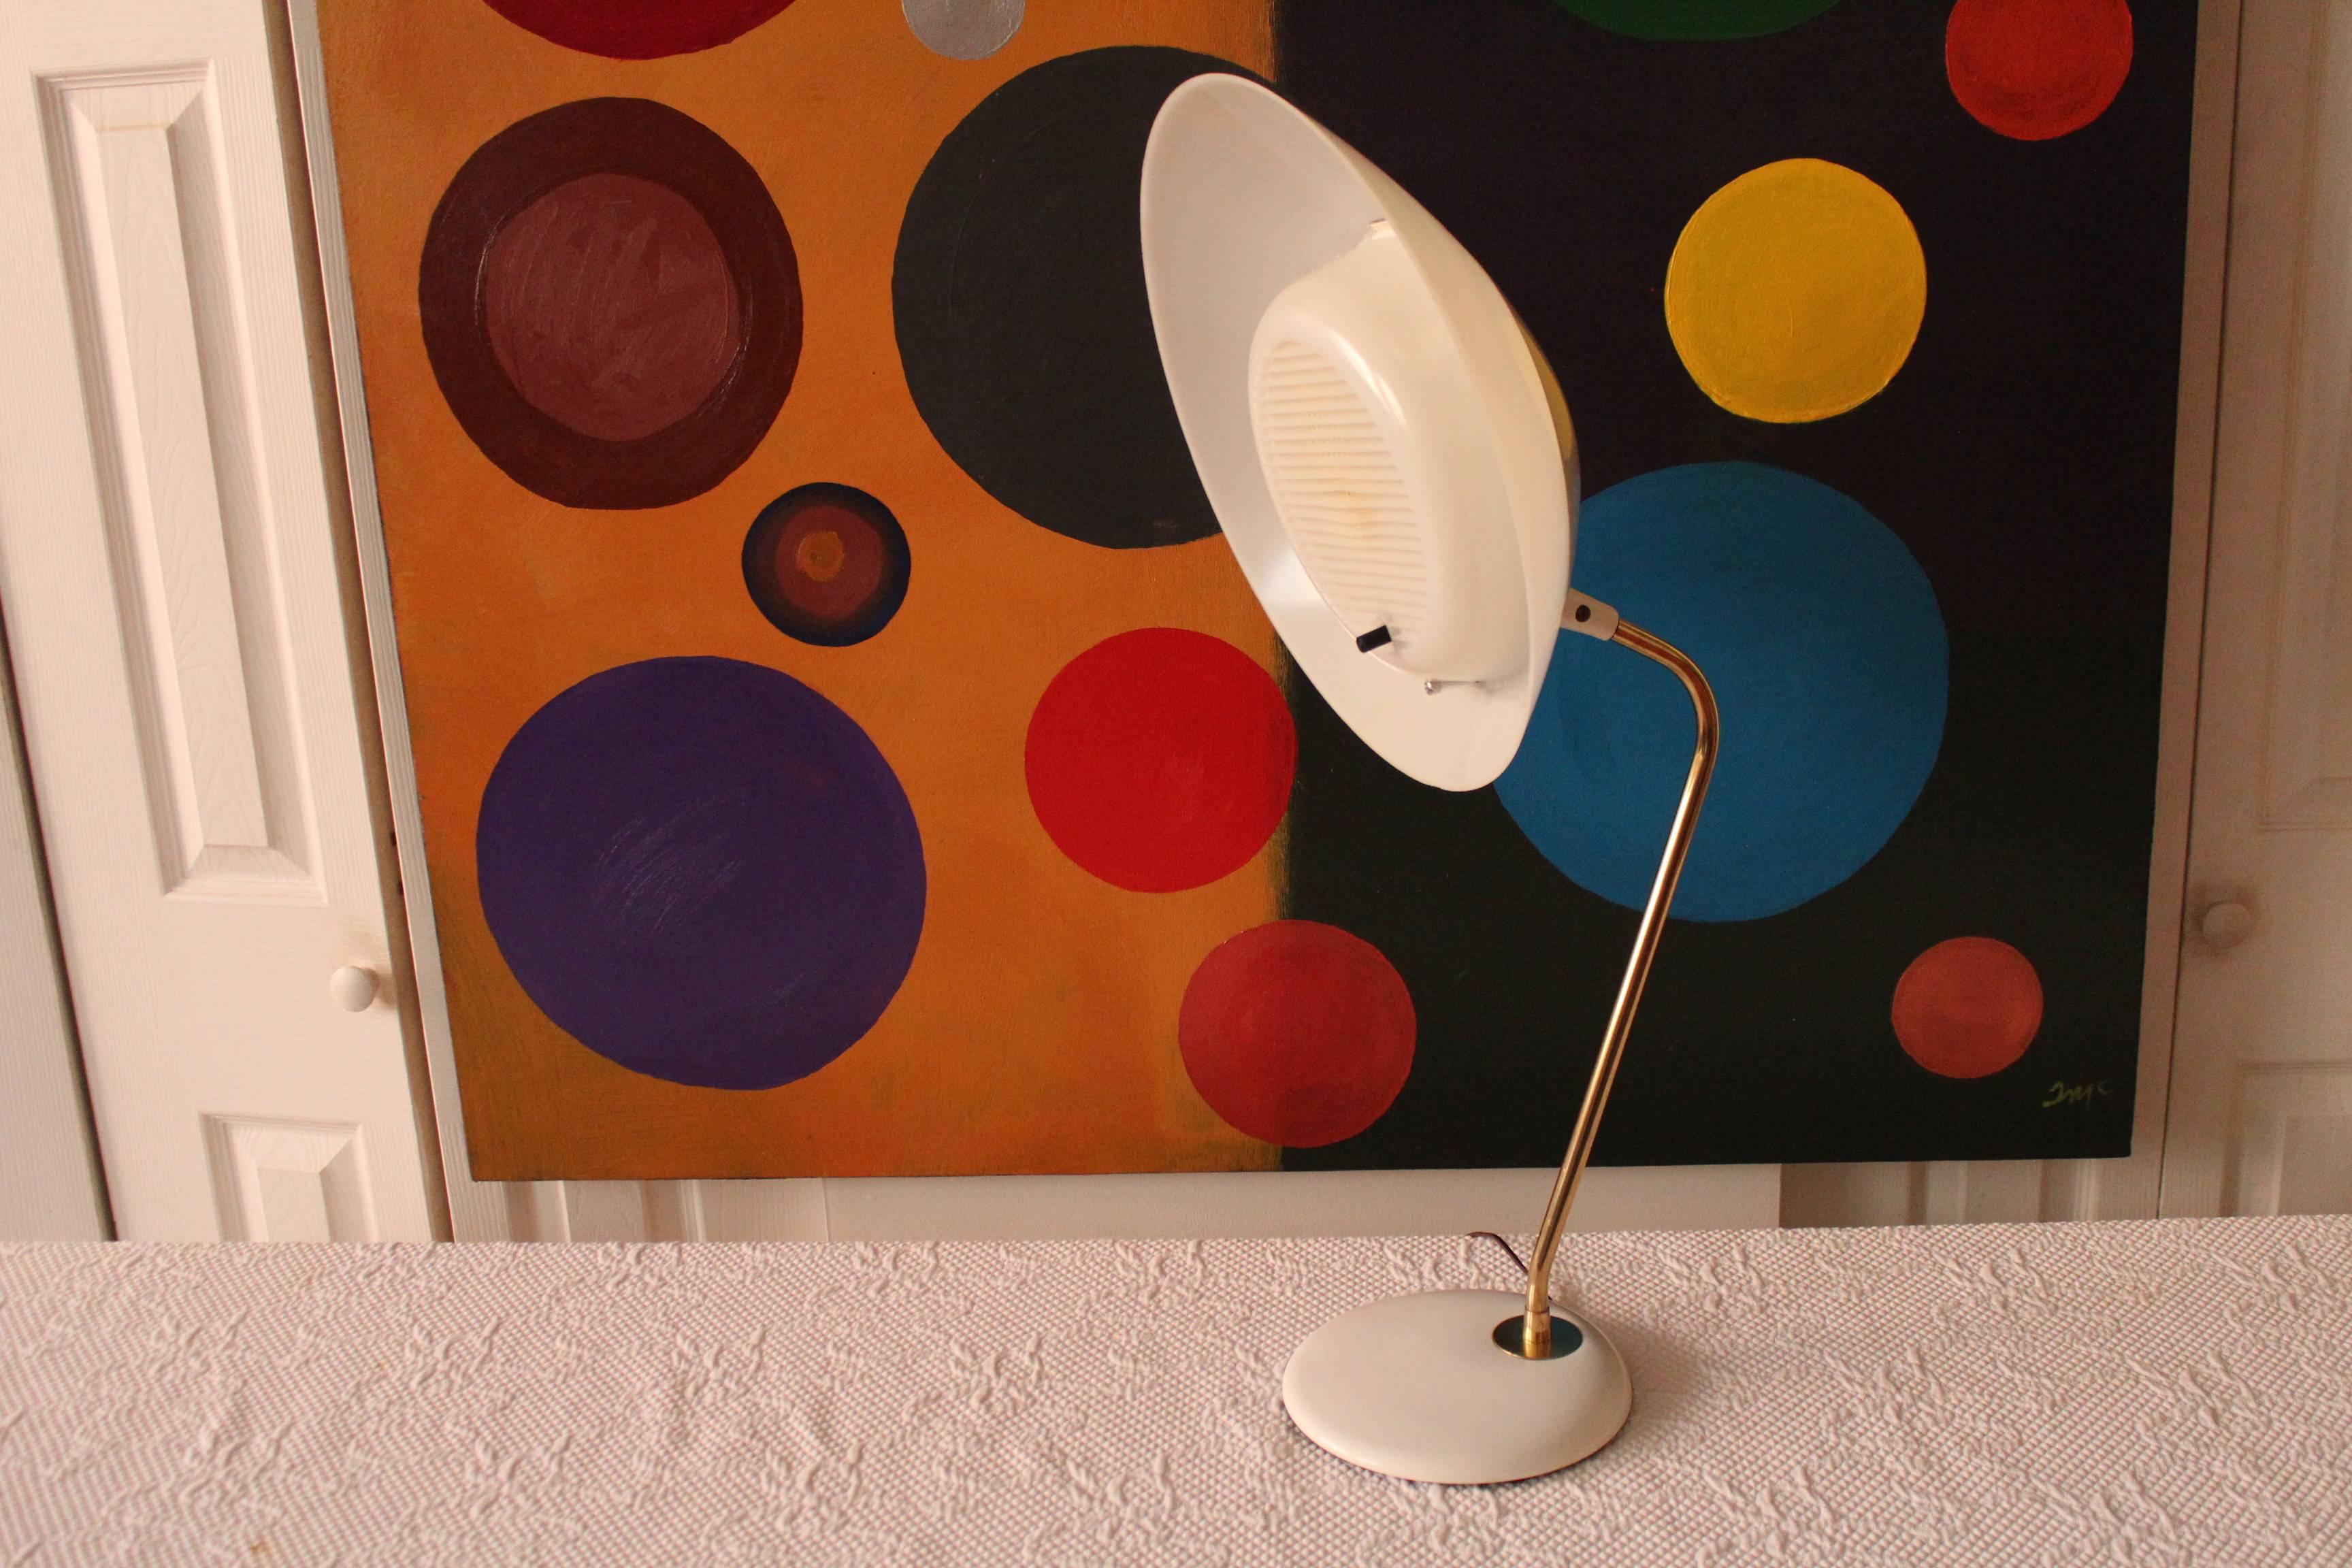 Authentic Gerald Thurston for Lightolier desk or table lamp. All original enameled aluminum shade and base. This lamp boast the original diffuser. Signed.